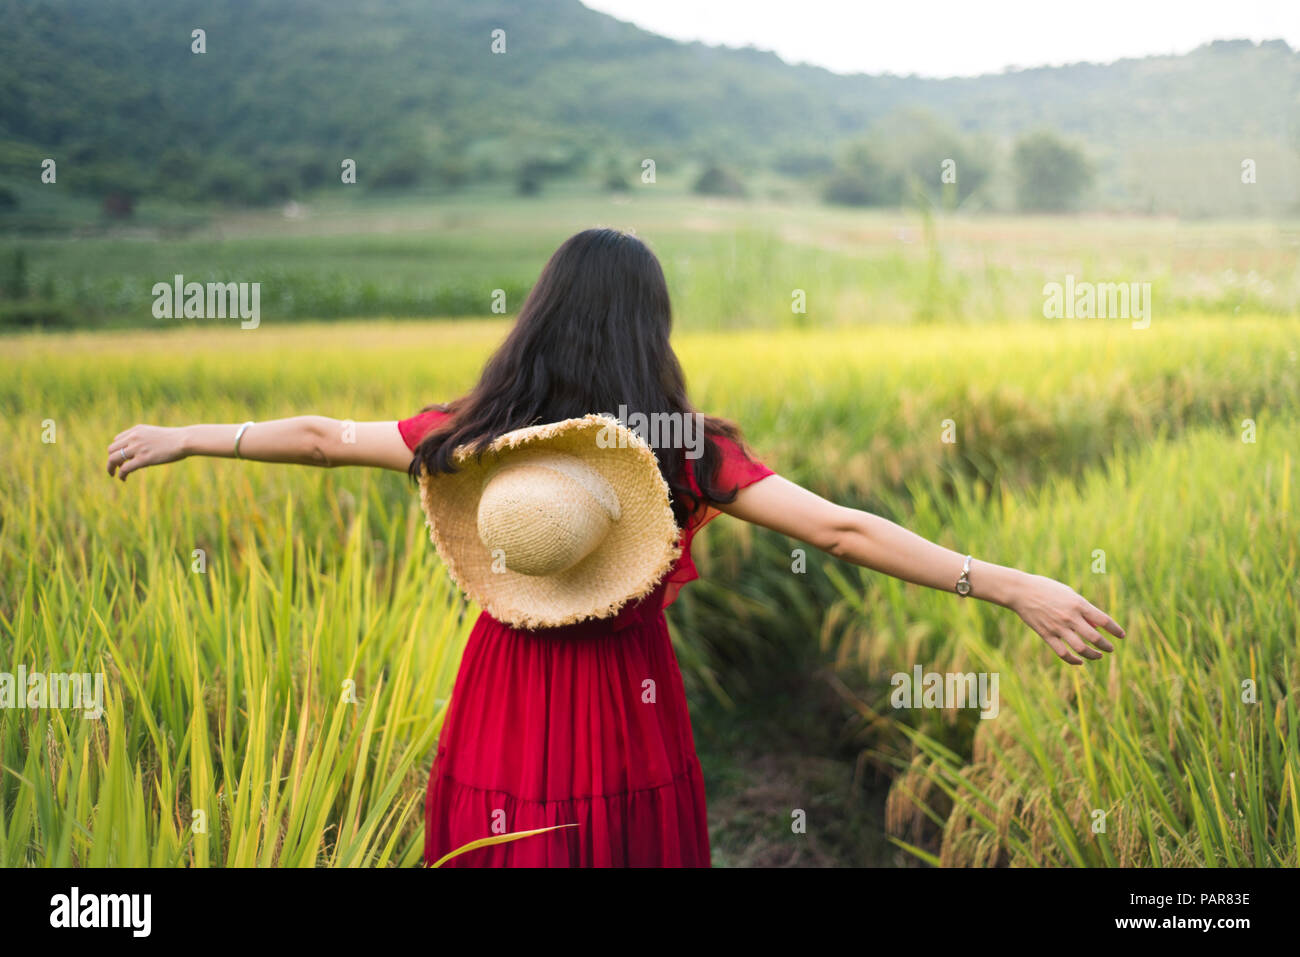 Girl walking in a rice field wearing red dress holding a hat Stock Photo